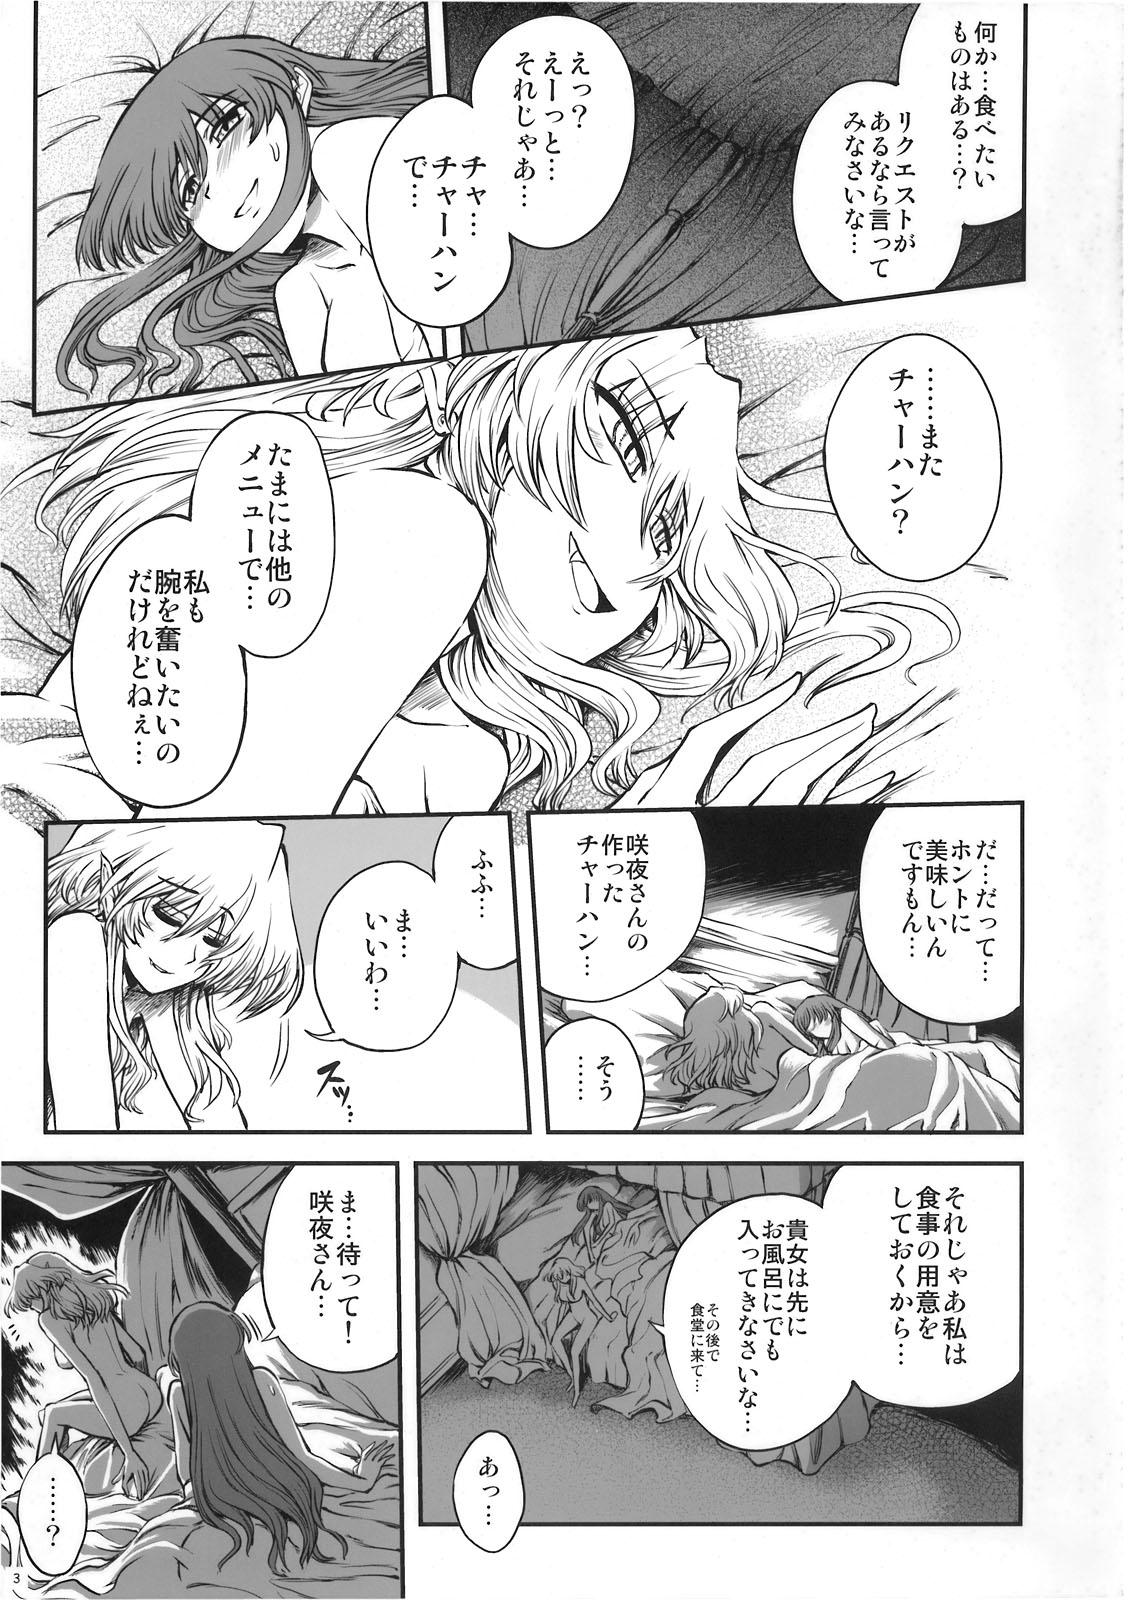 Real Luna Dial Maid to Chi no Unmei dokei Lunatic+alpha - Touhou project Fuck Pussy - Page 4